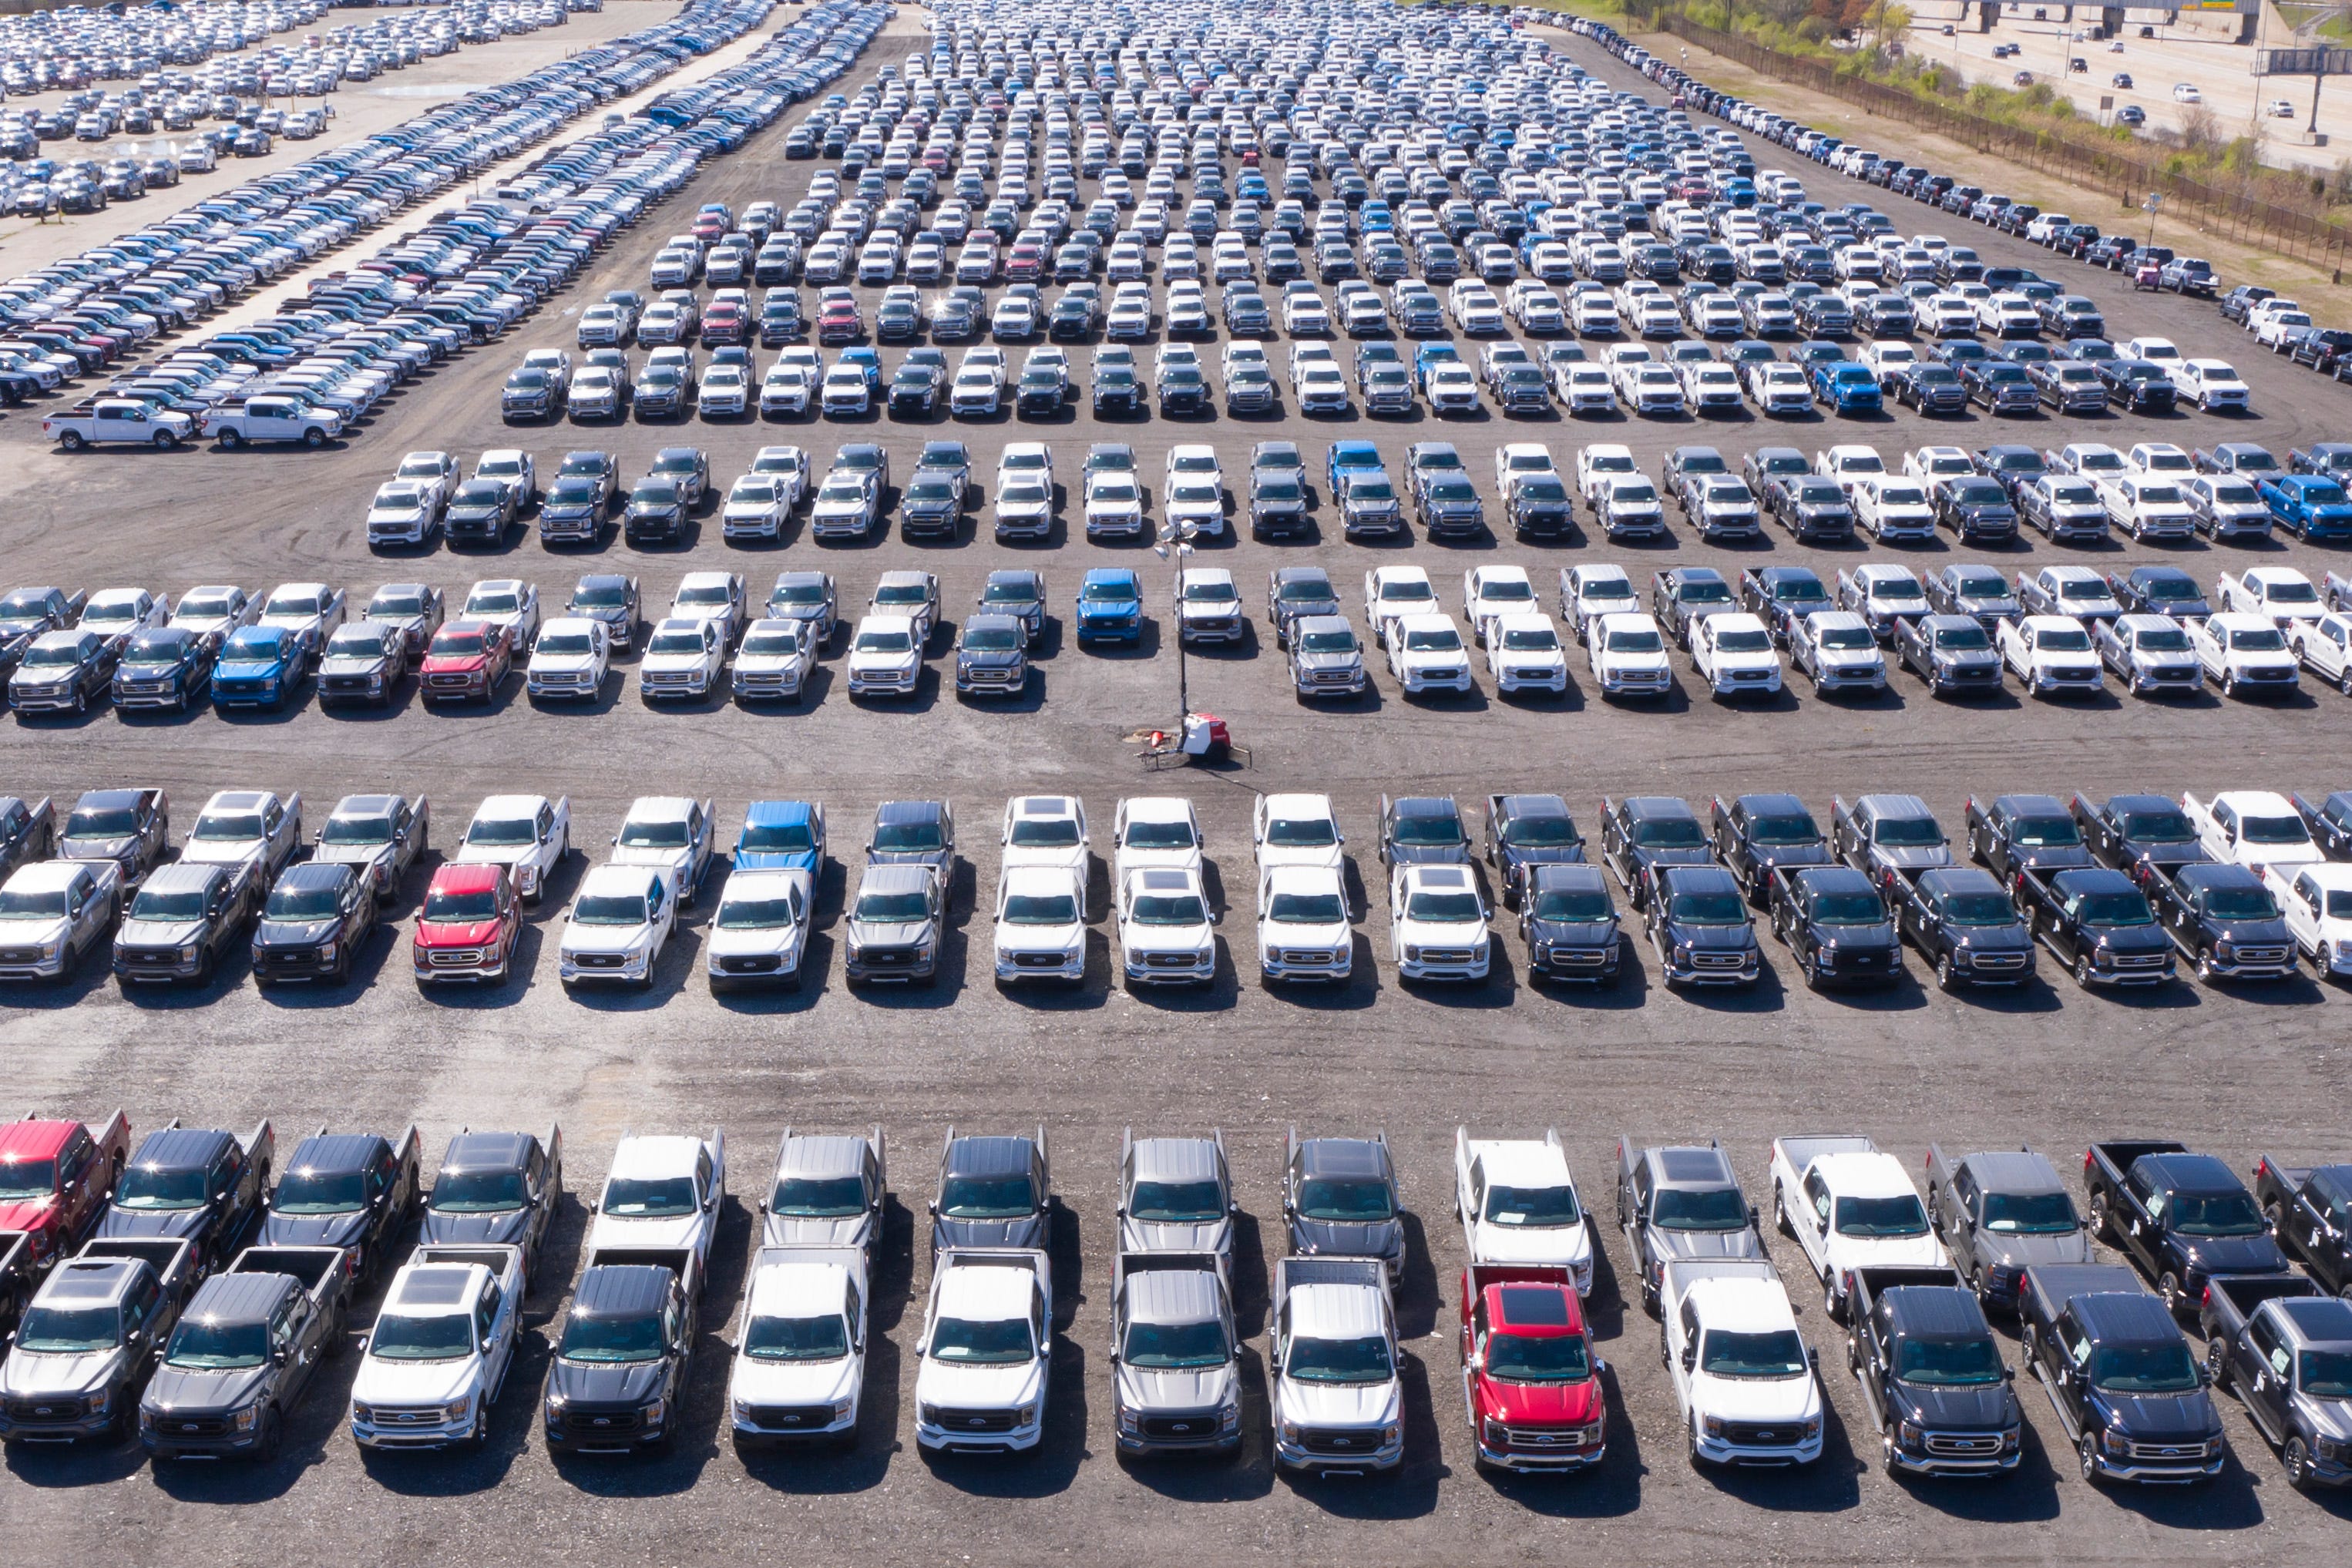 Image of cars on lot. motormindz is a venture consultancy​ for the automotive industry​​. ​We advise and invest​ ​to create and scale​ ​new product ecosystems​. ​​​We provide ​automotive venture consulting​​ for startups, OEMs and dealers.​